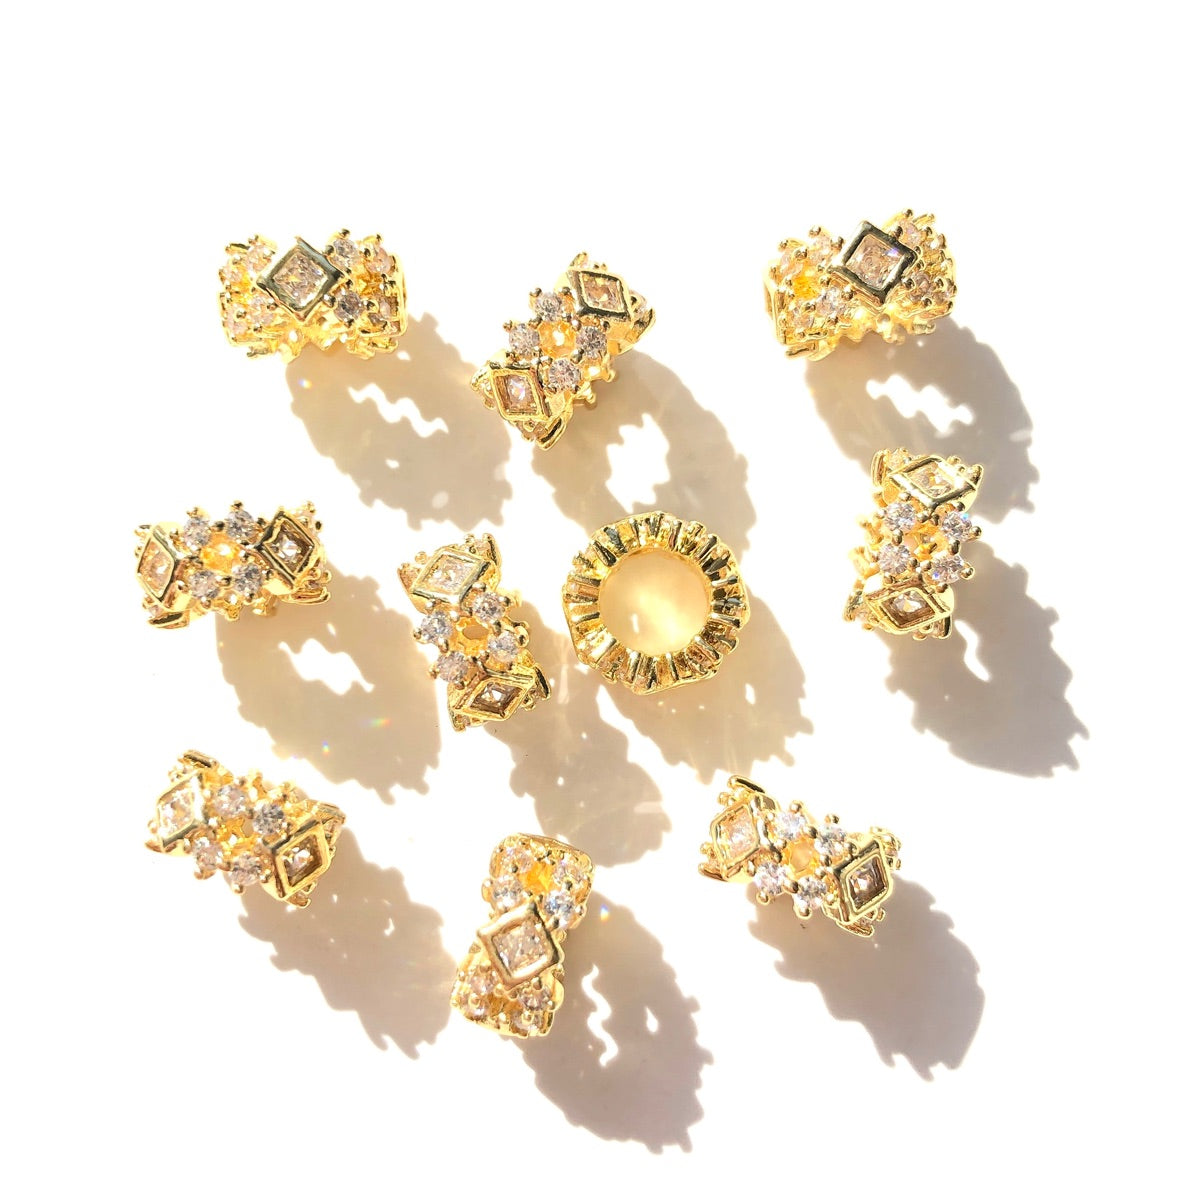 10-20-50pcs/lot 9mm CZ Paved Big Hole Hollow Rondelle Wheel Spacers Gold CZ Paved Spacers Big Hole Beads New Spacers Arrivals Rondelle Beads Wholesale Charms Beads Beyond